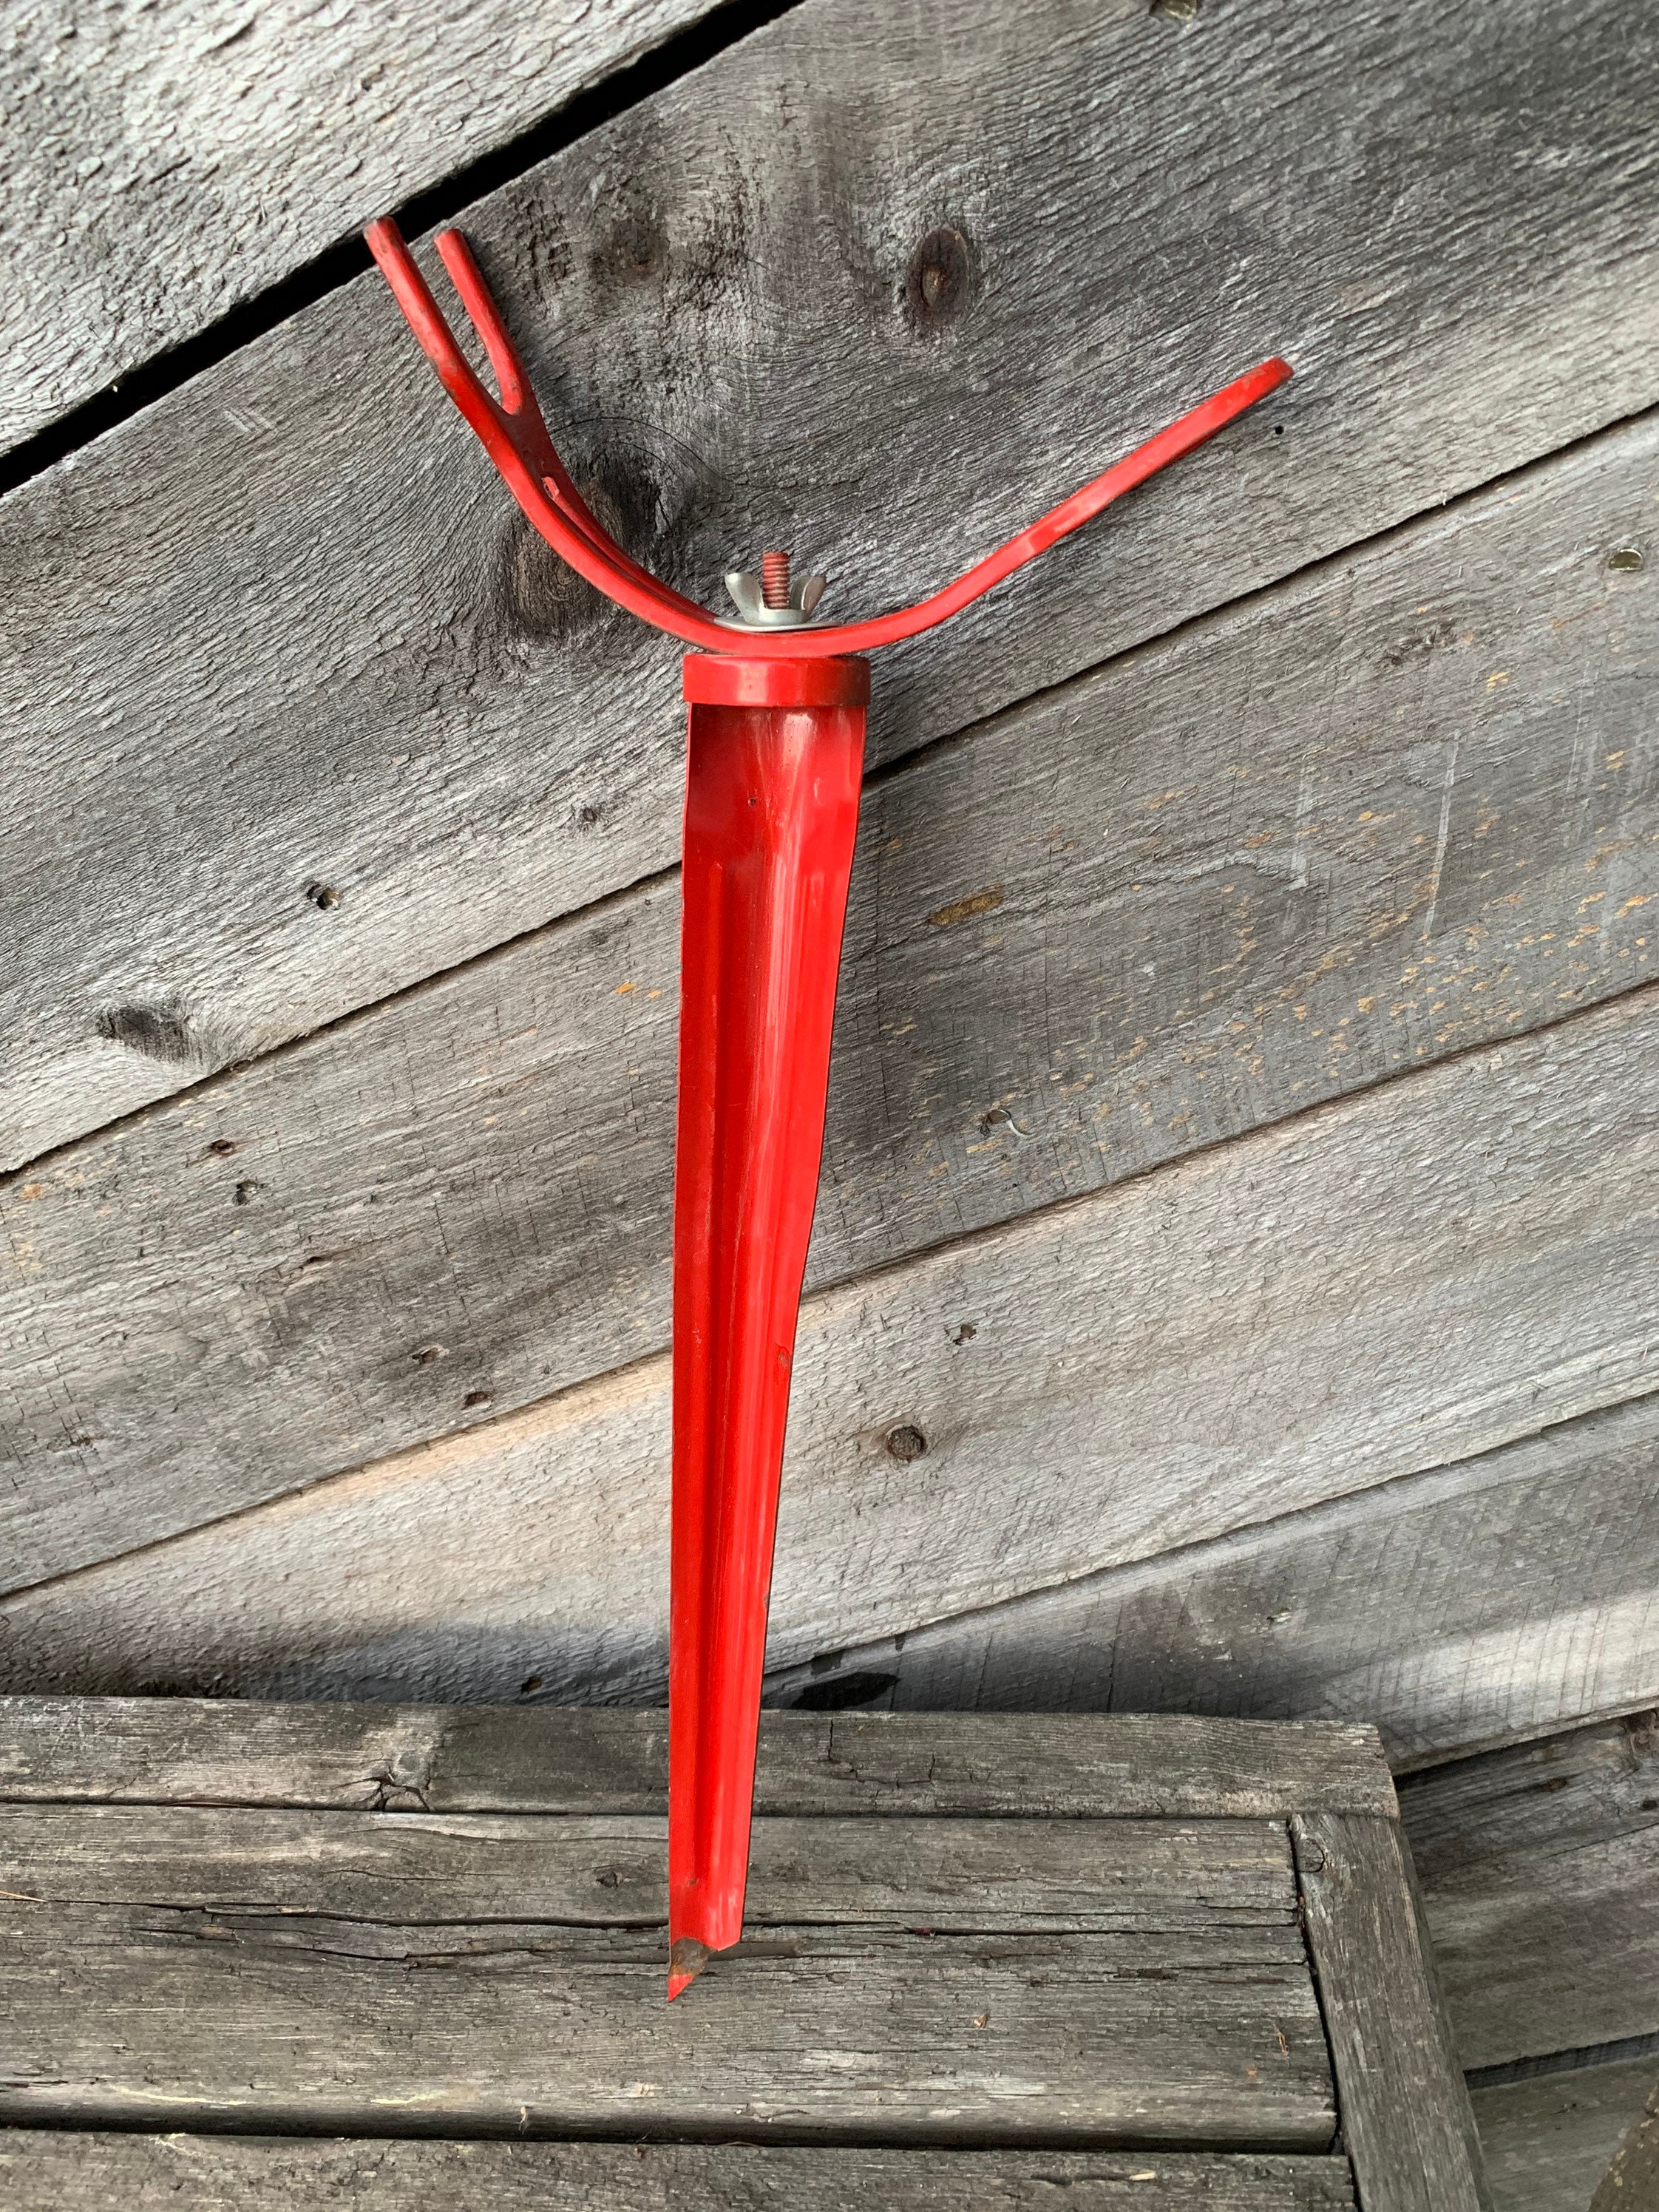 Fishing Pole Holder Rod Stand Shore Fishing Red Metal Vintage Reel Ground  Stake Lake Stream River Tool Camping Backpacking Backcountry 